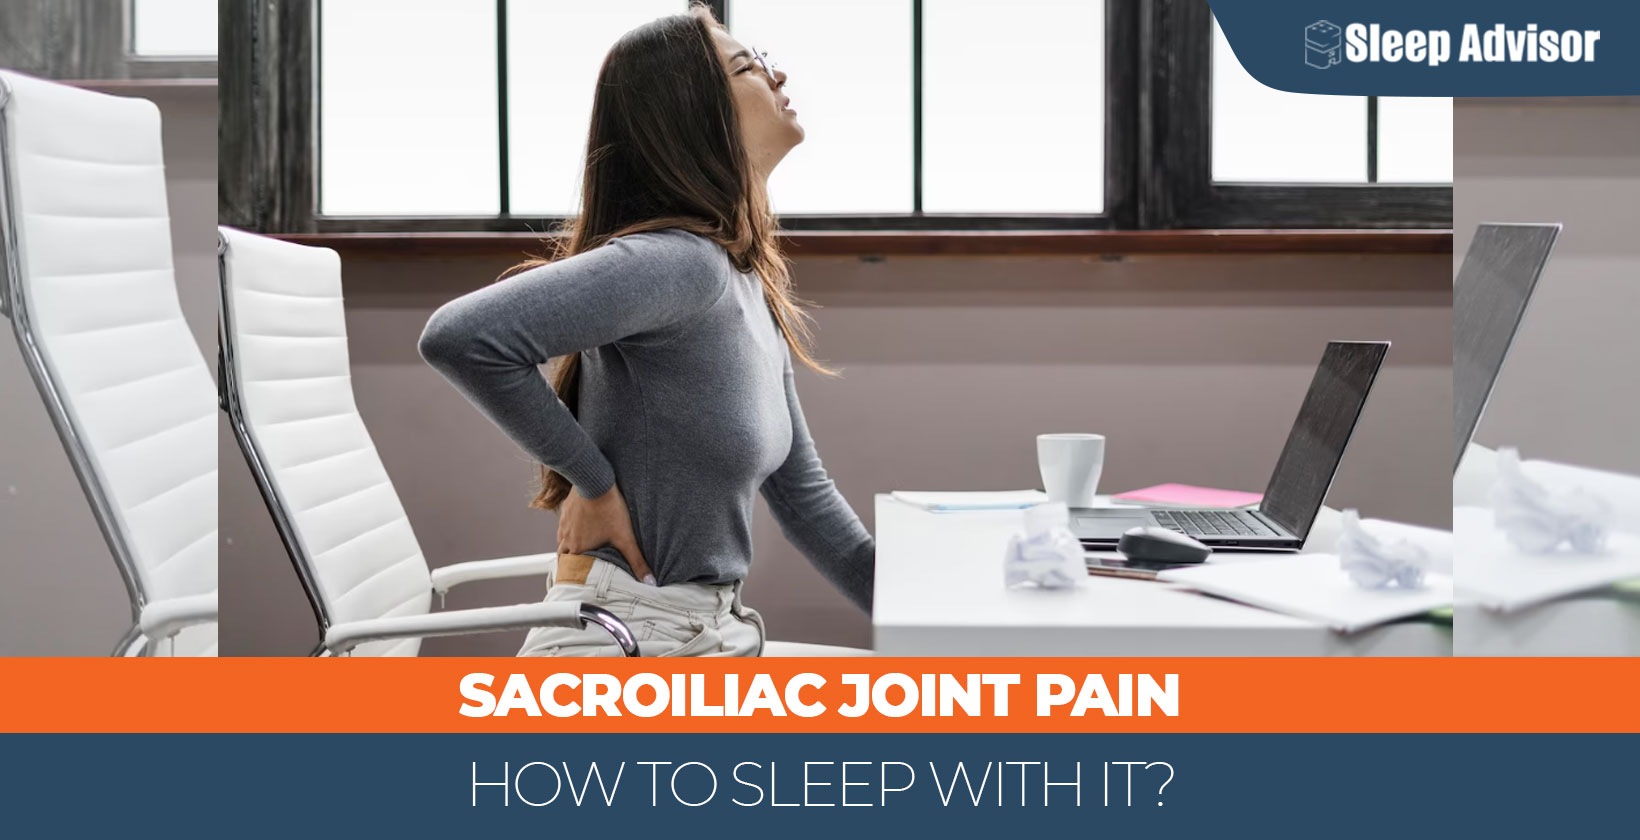 Great Tips to Sleep with SI Joint Pain